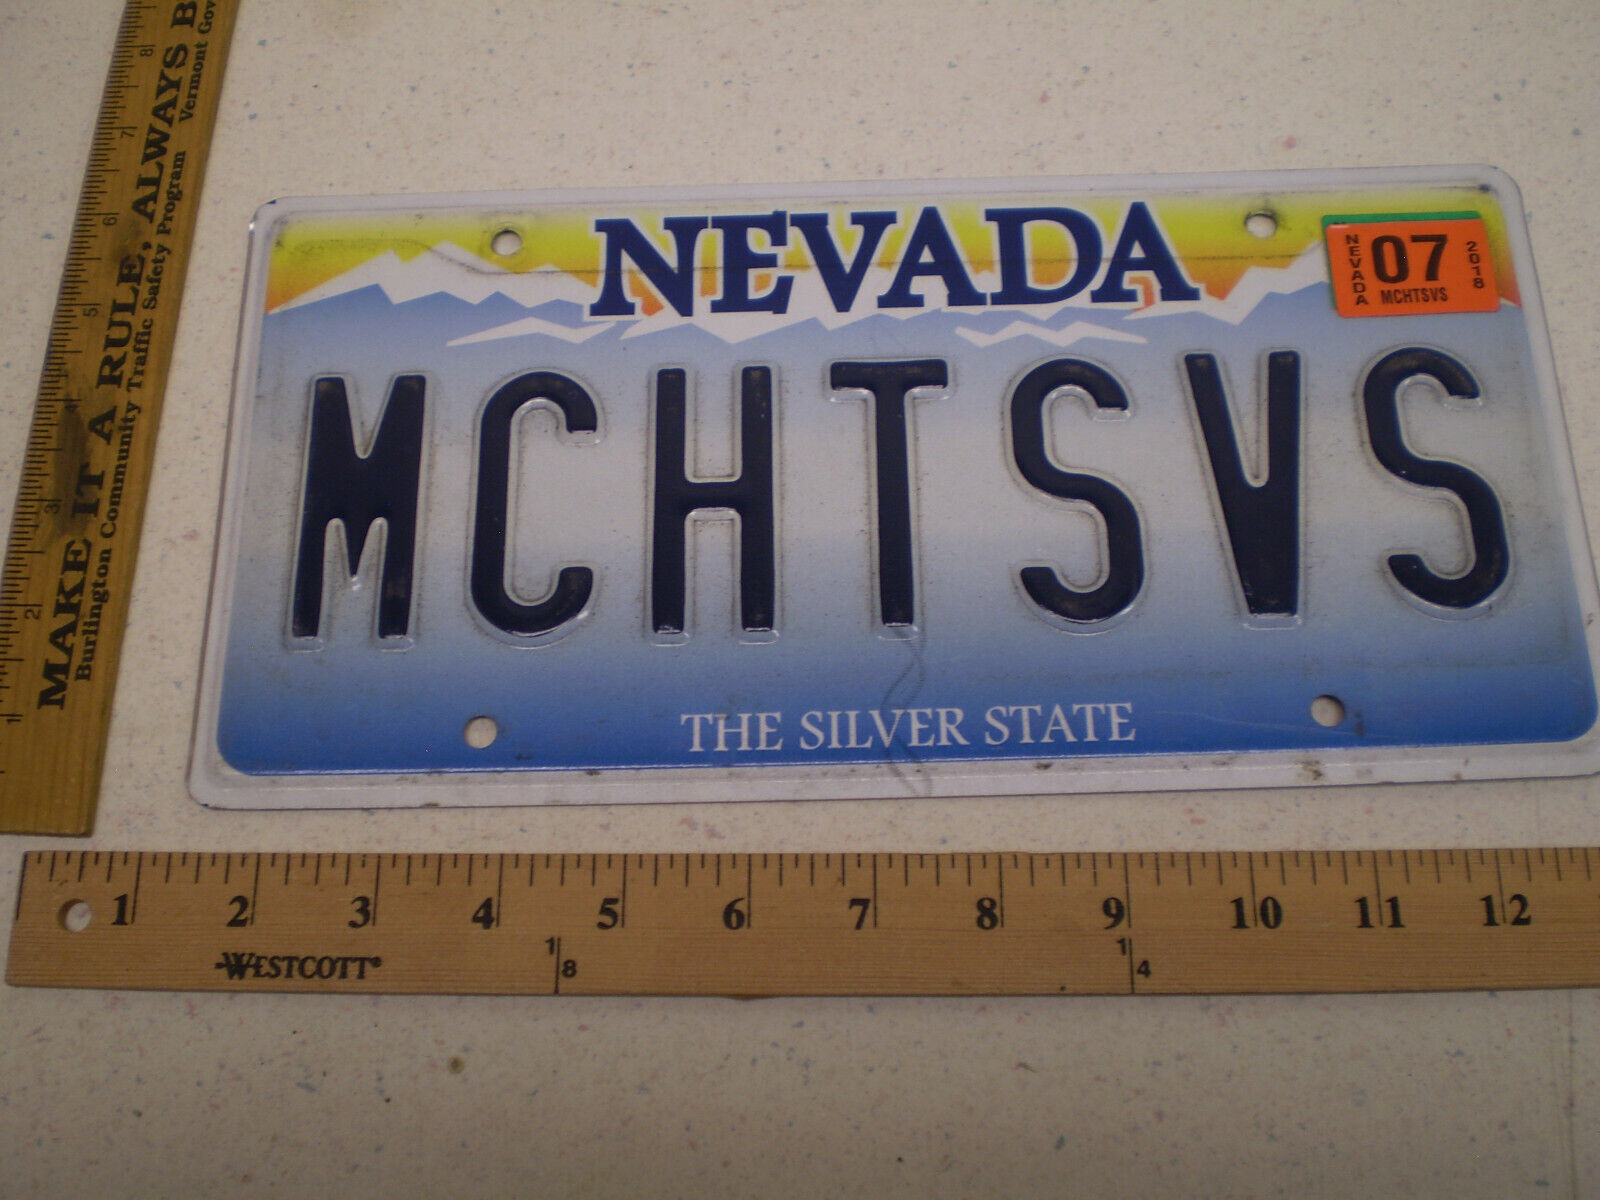 2018 18 NEVADA NV VANITY LICENSE PLATE MCHTSVS MISCHIEVOUS TROUBLE PLAYFUL